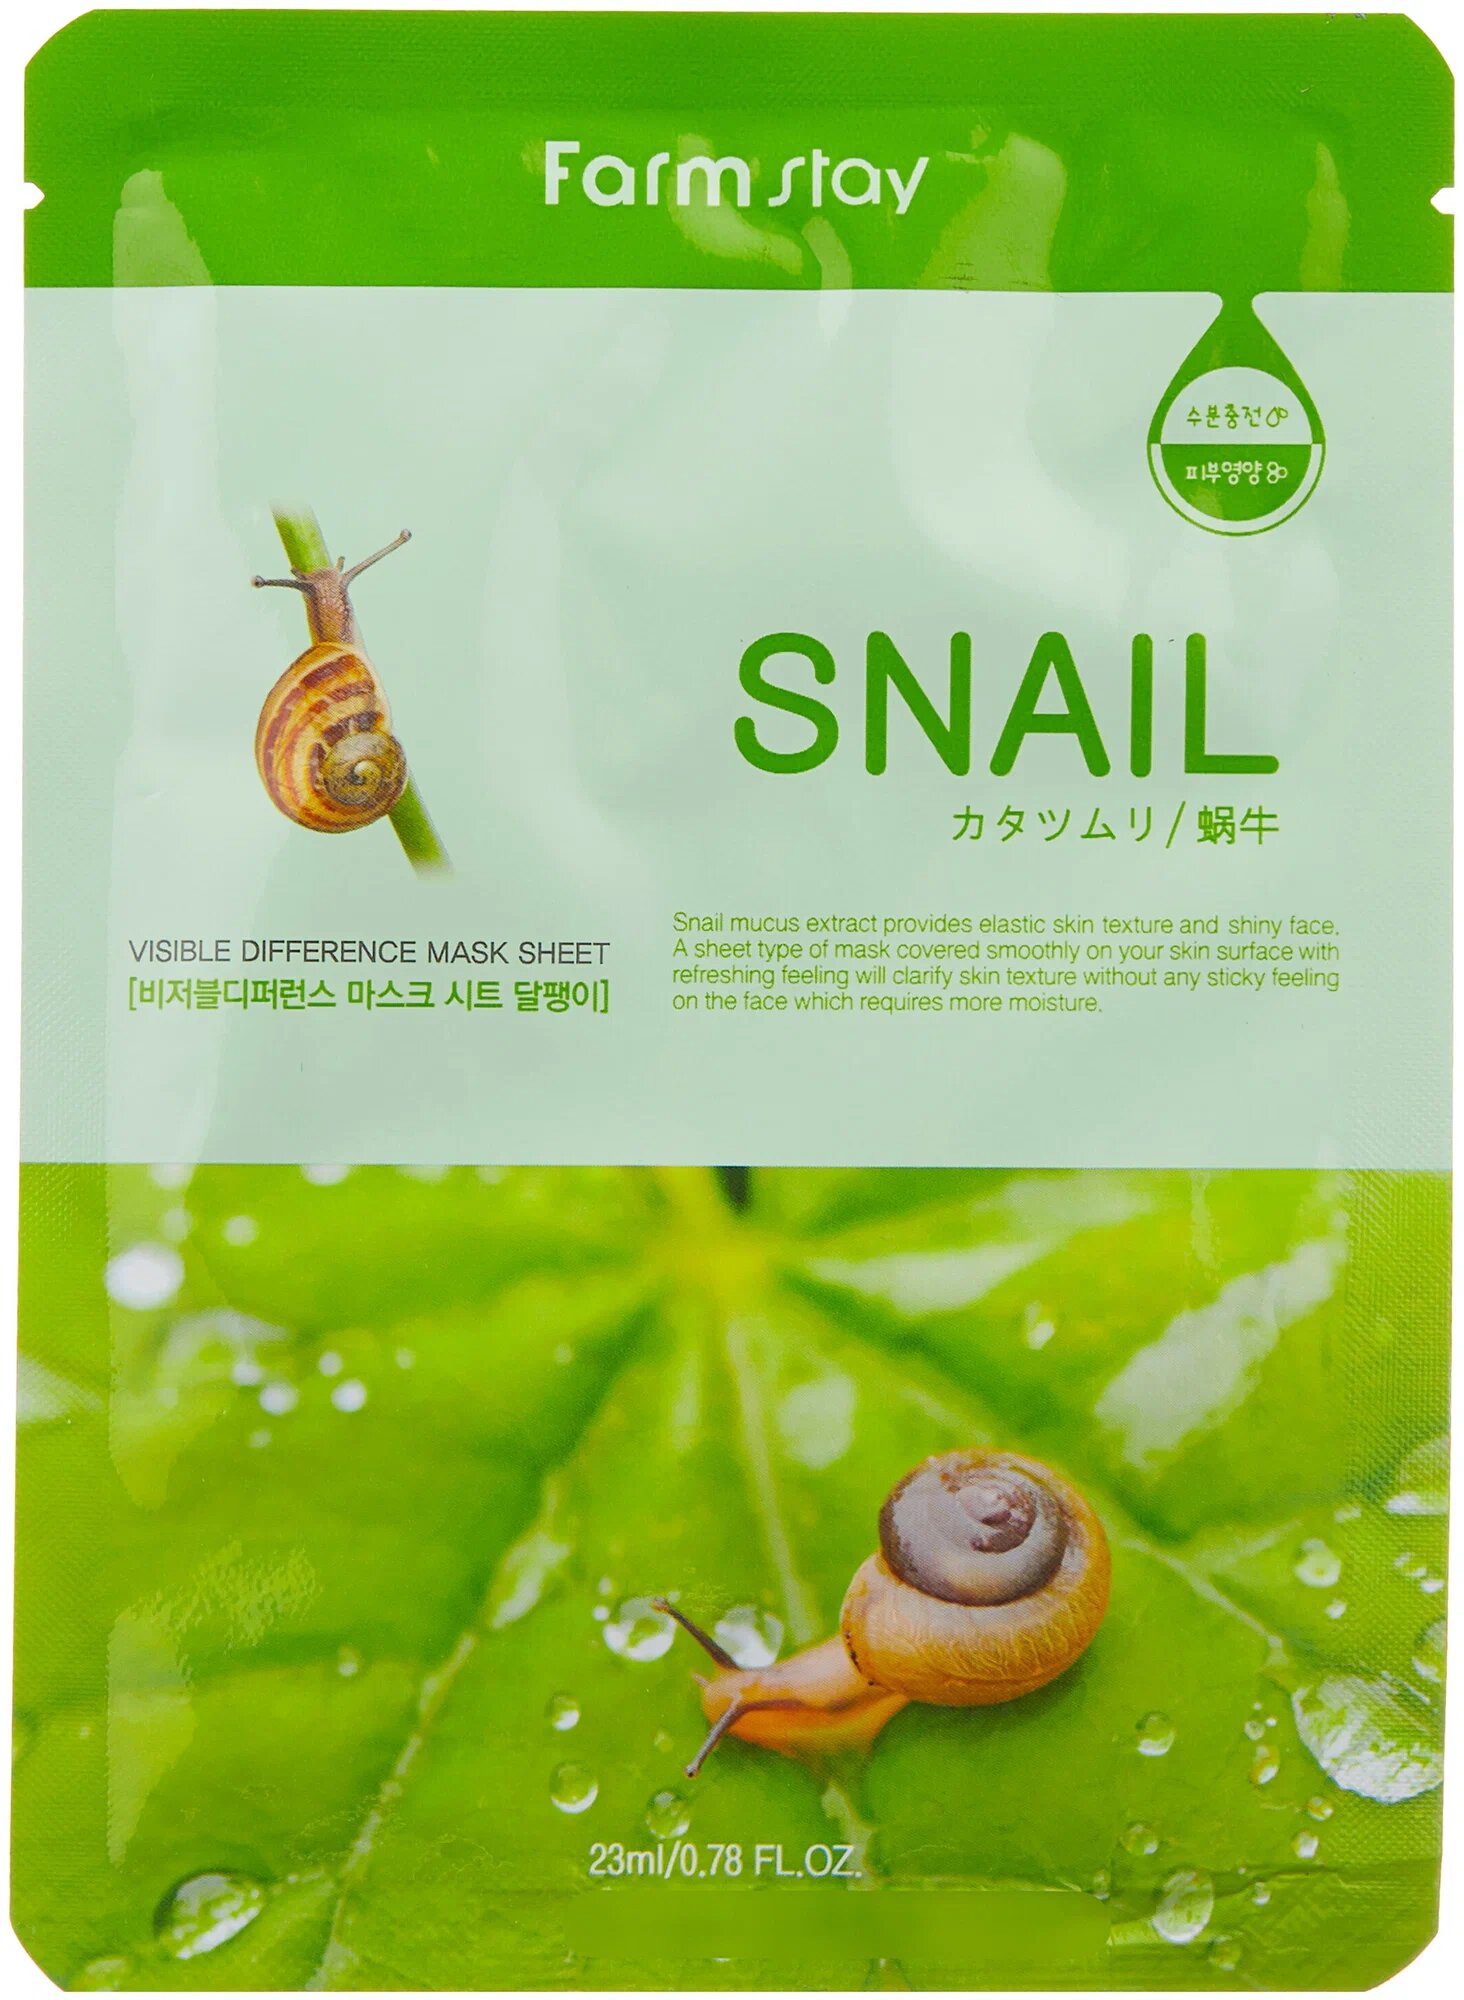 Farmstay Visible Difference Mask Sheet Snail с экстрактом улитки, 23 г, 23 мл